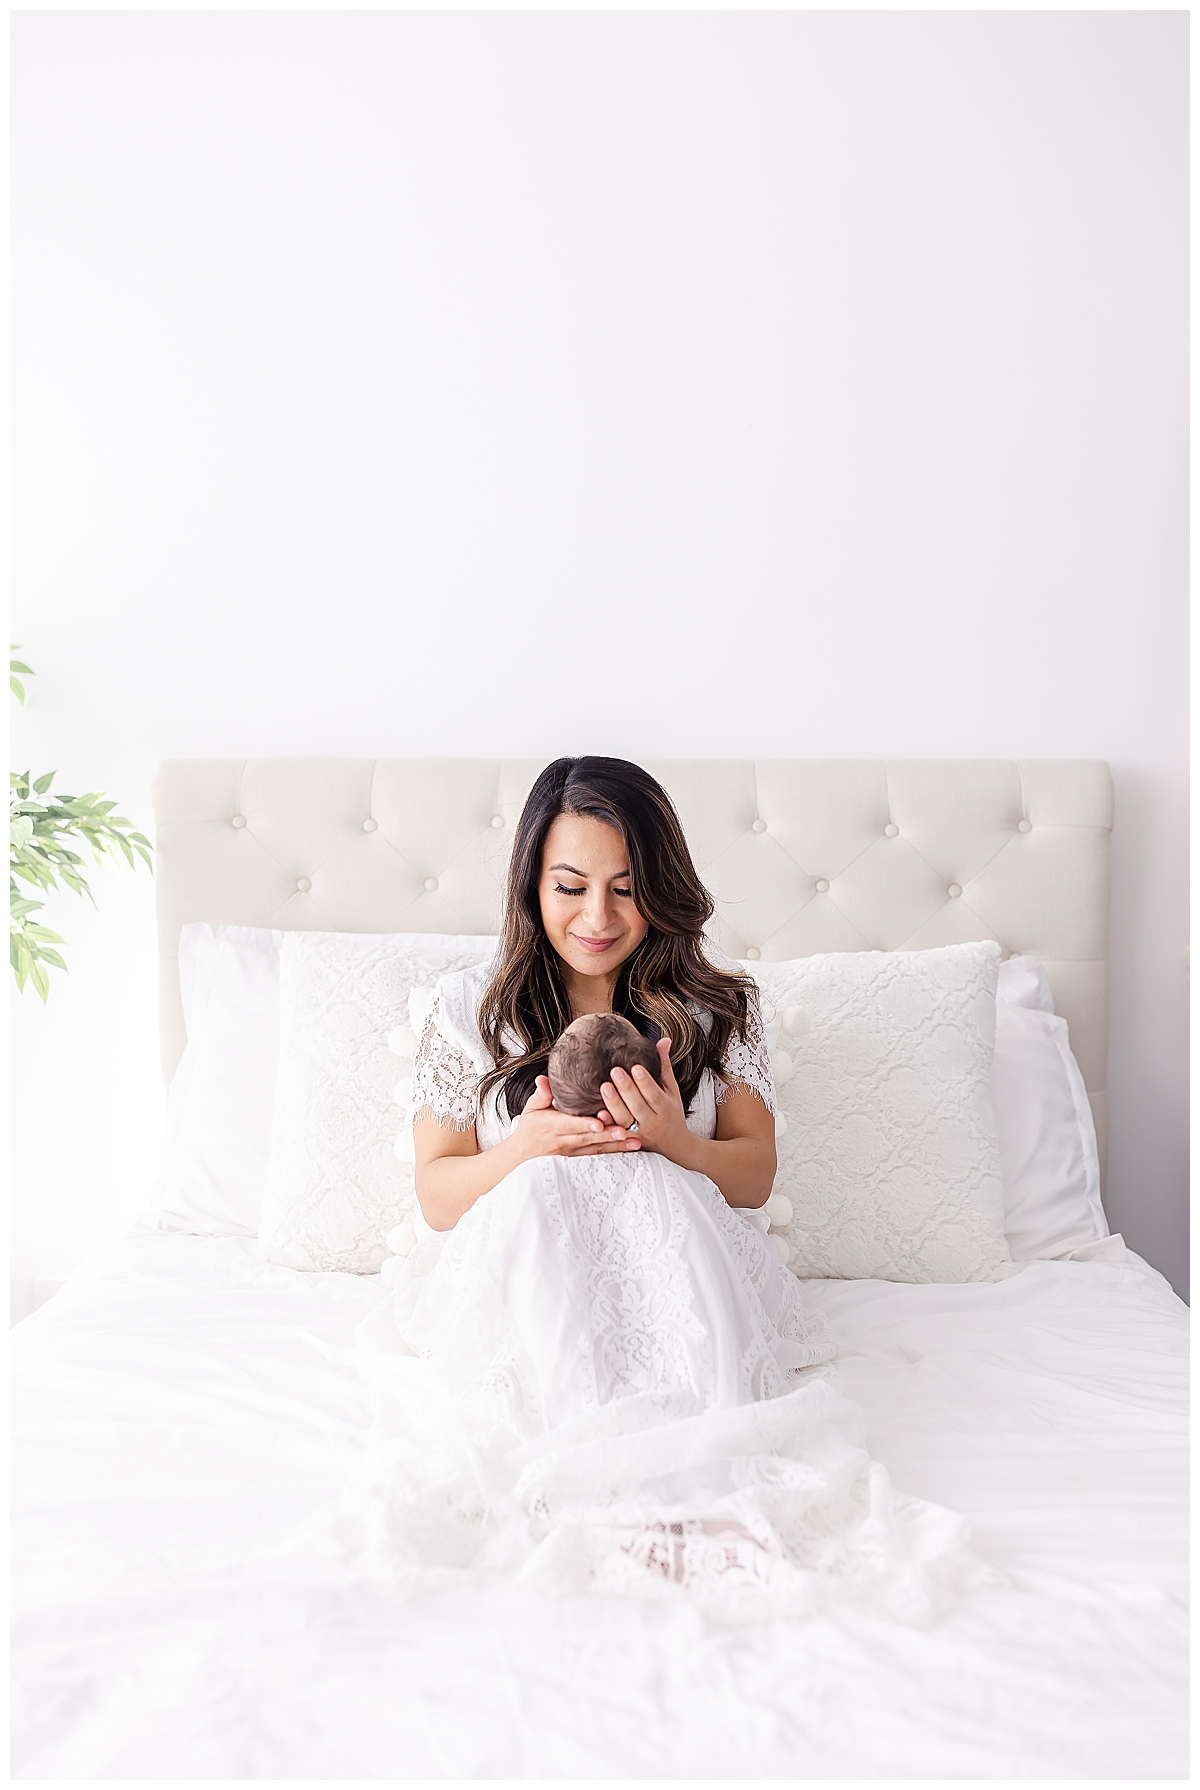 Newborn swaddled in white blanket laying on white bed with mom in white lace dress